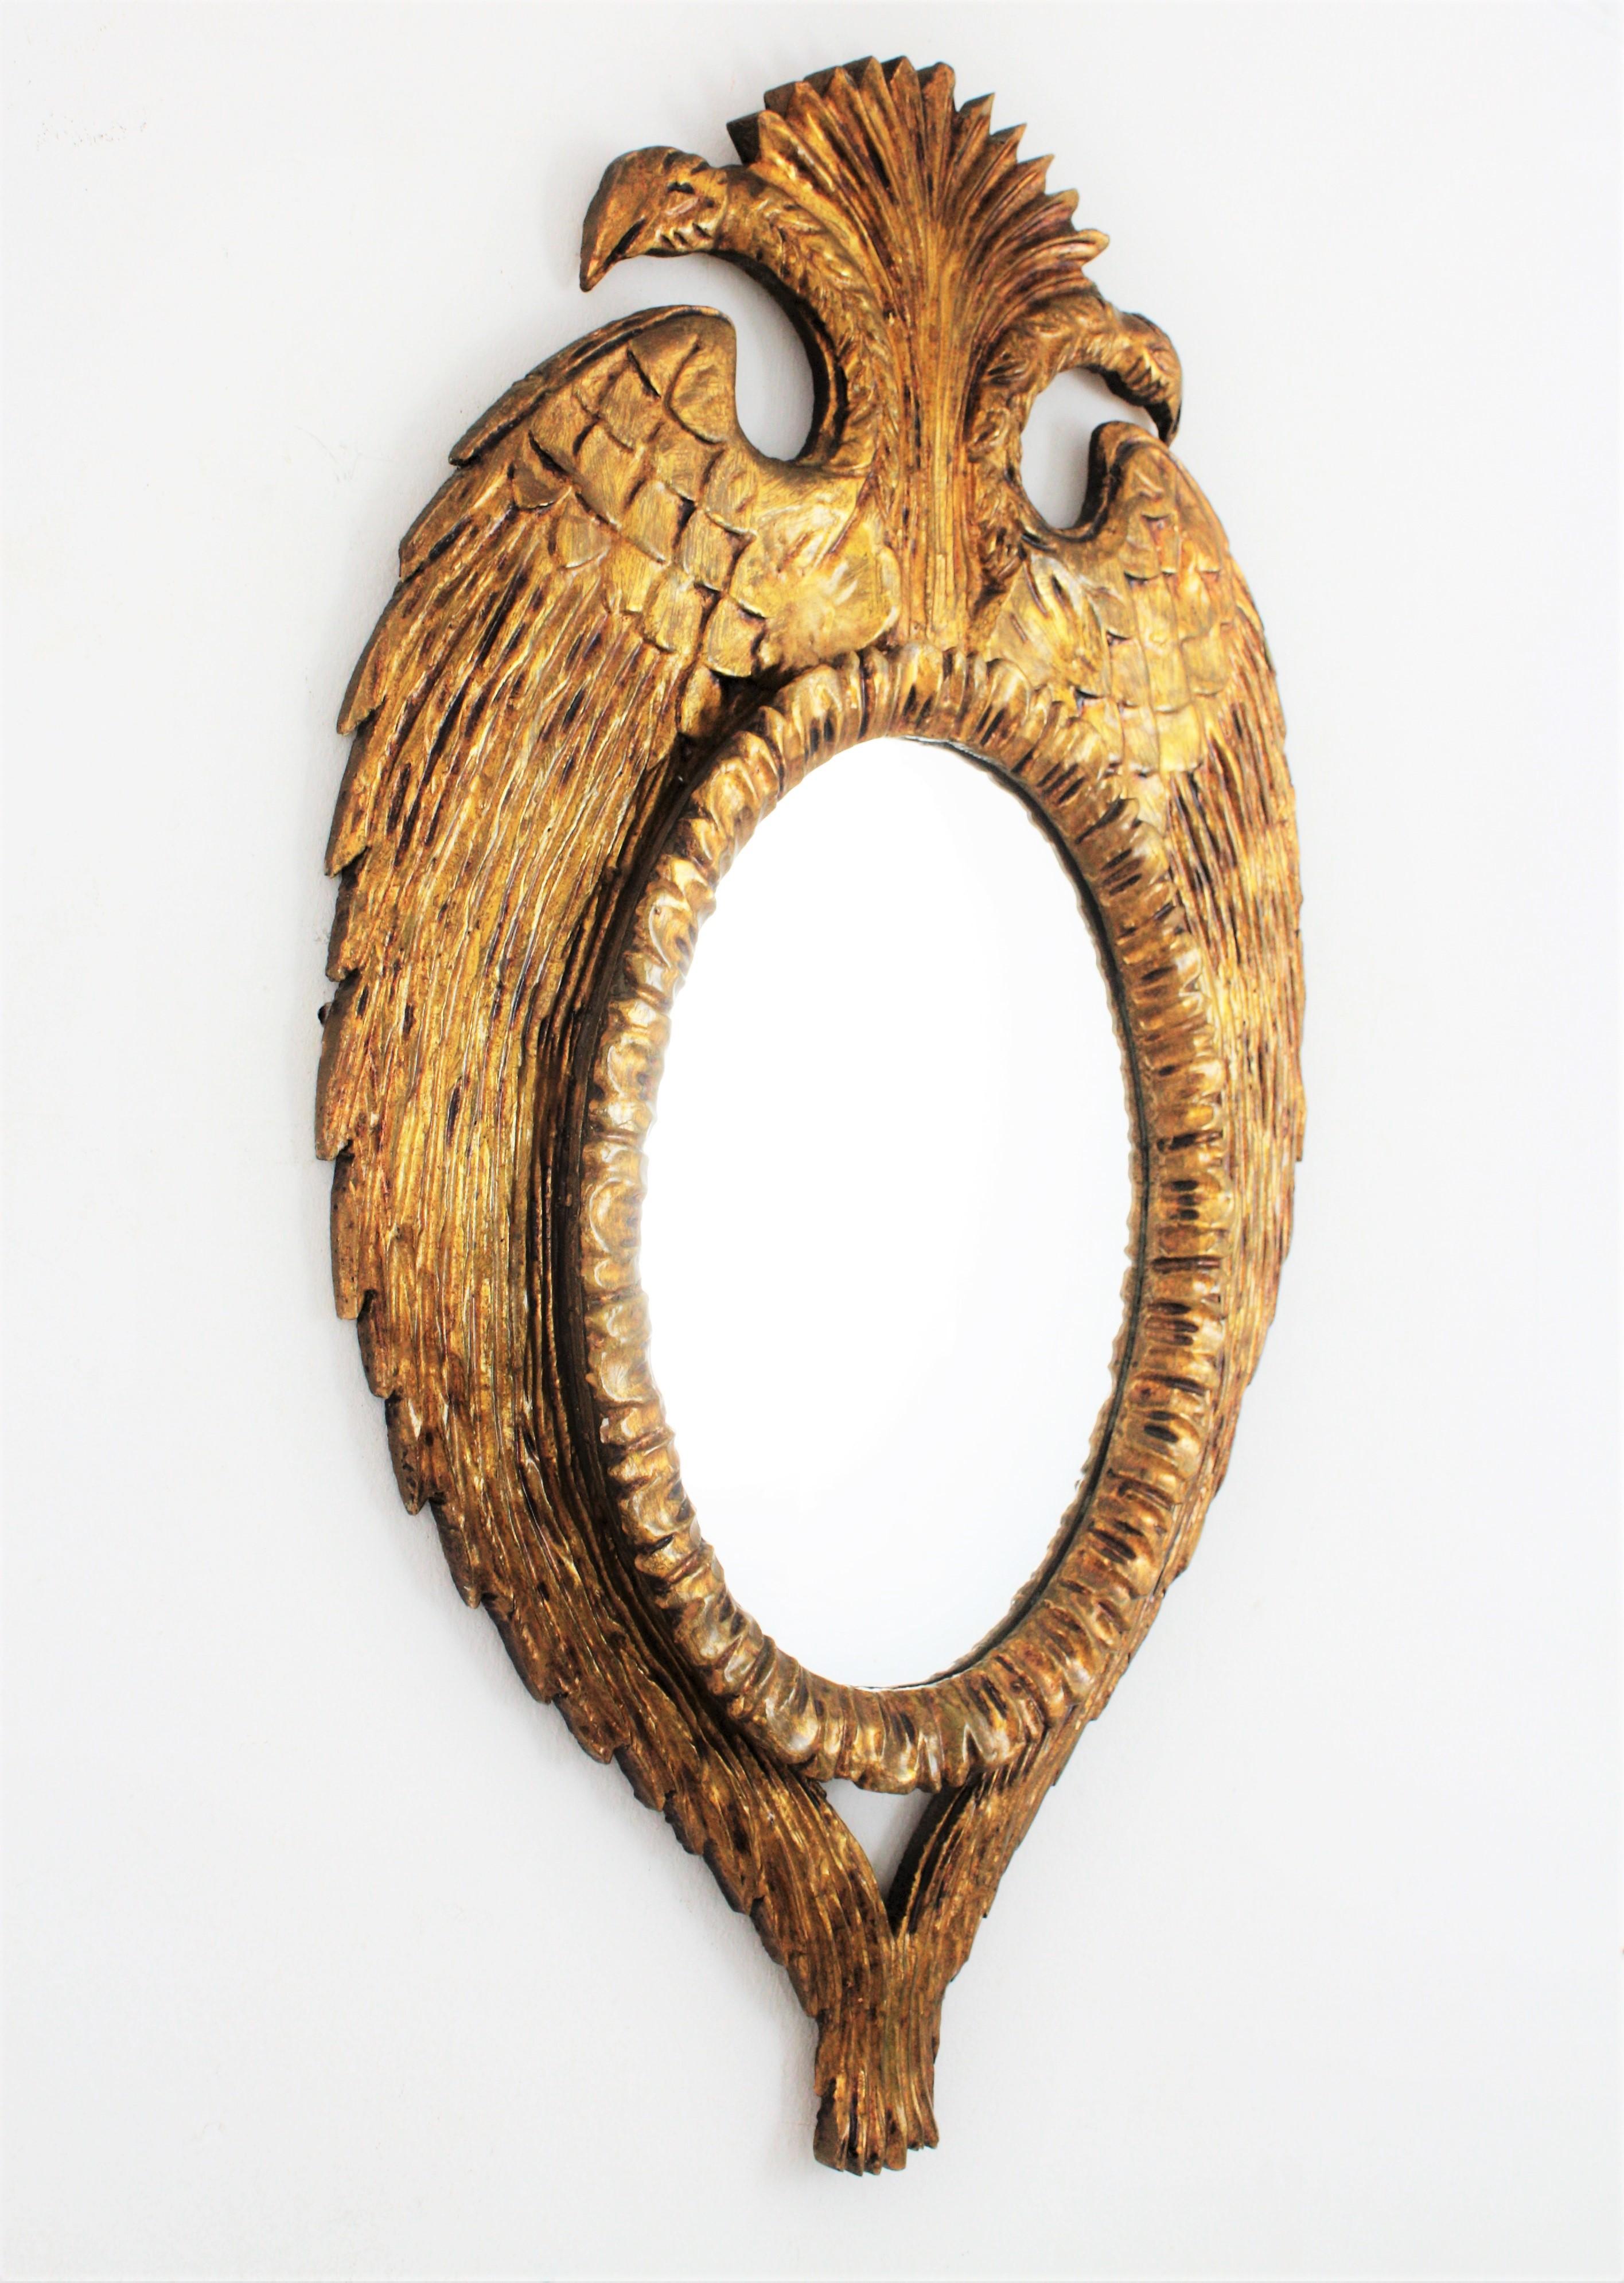 Magnificent carved giltwood double headed bird shaped frame with an scalloped pattern surrounding an oval mirror, Spain, 1950s-1960s.
Unusual frame with a highly decorative double headed eagle with symmetric wings and tails holding the central oval